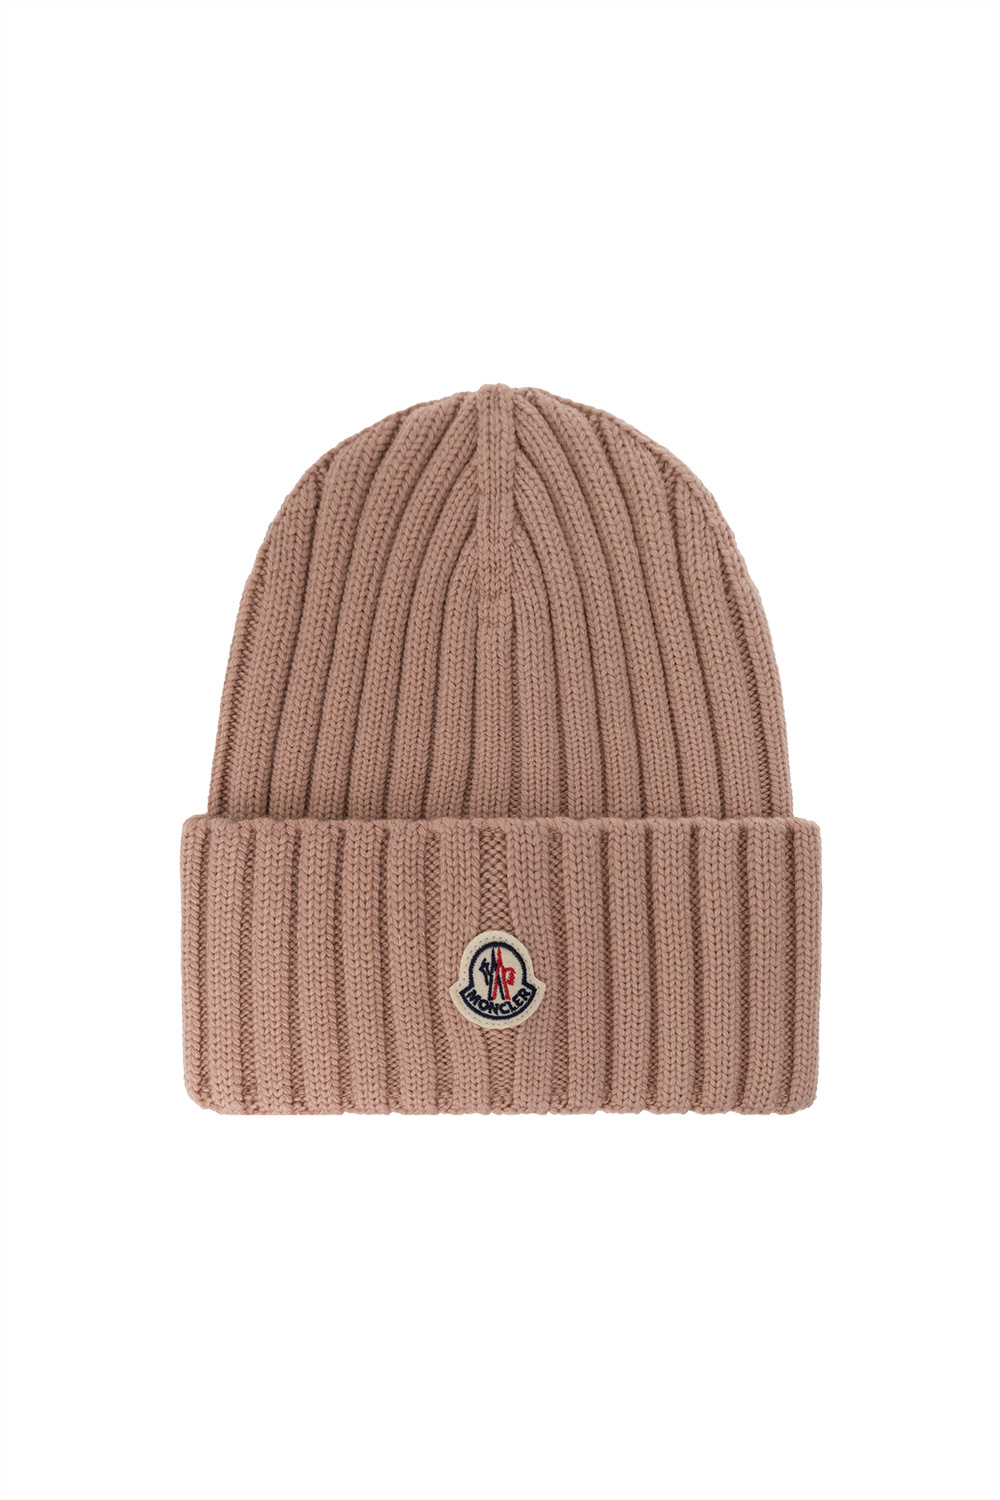 Moncler Style your game day look wearing the ® NBA Cardinal Red Two-Tone Snapback Bulls Cap